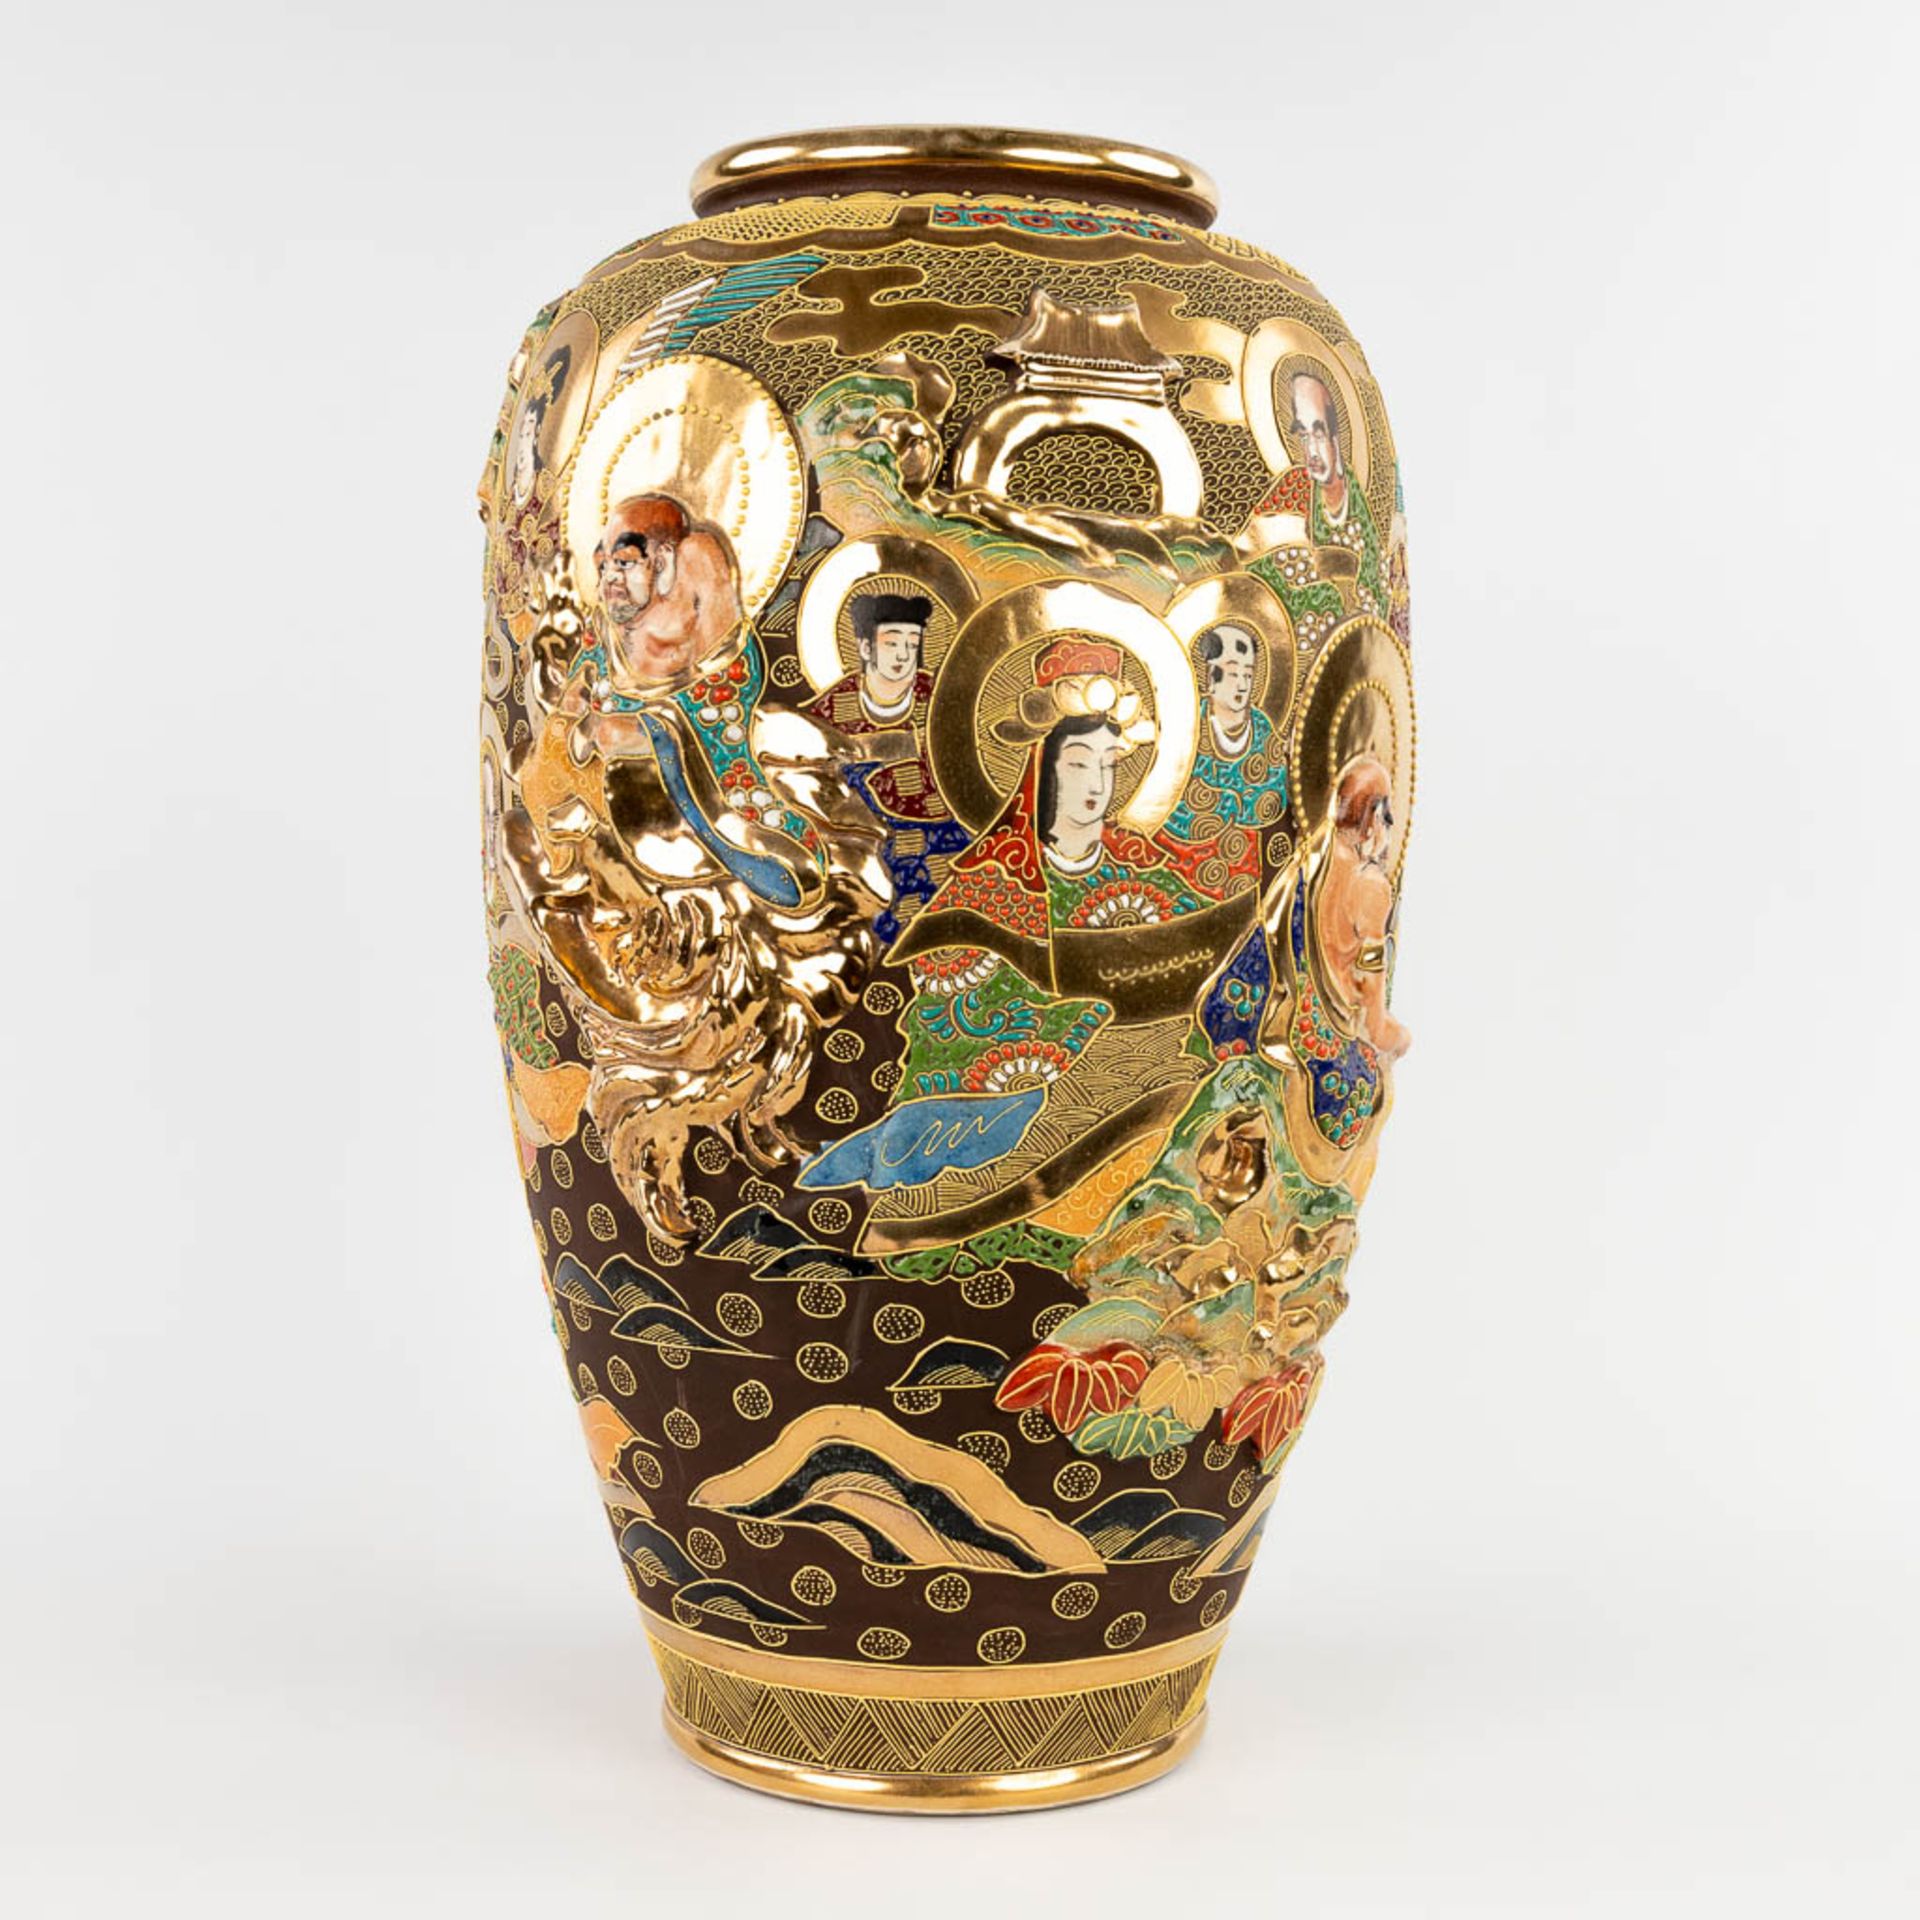 A large vase, Satsuma faience decorated with men and ladies, Japan. 20th C. (H:48 x D:28 cm) - Image 5 of 17